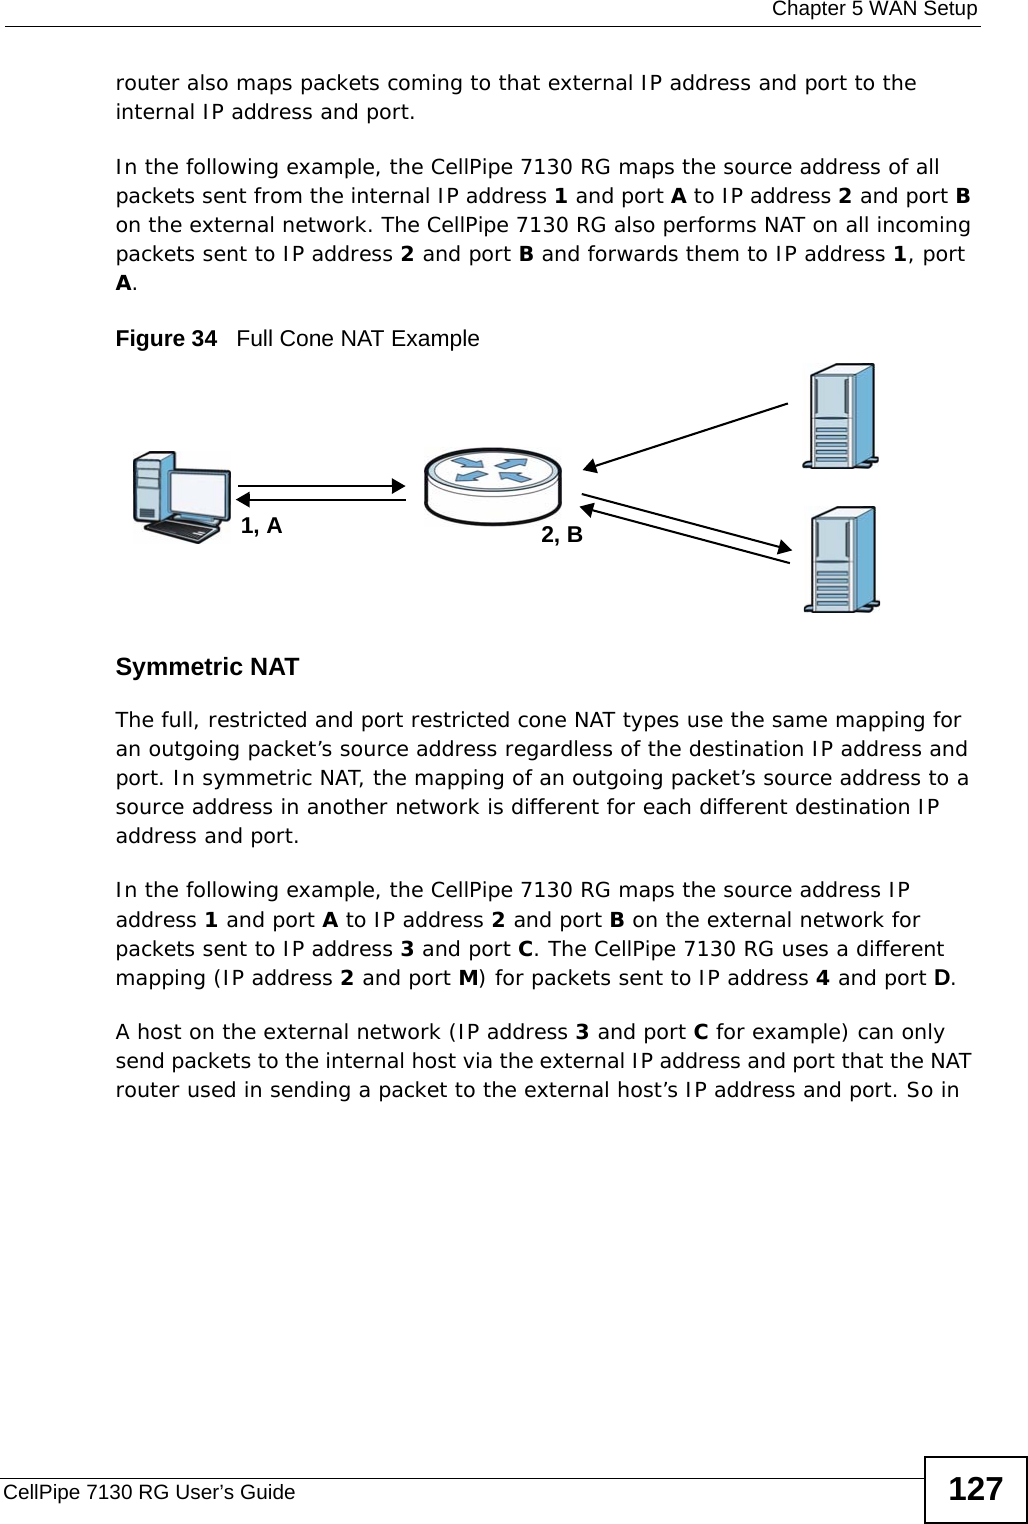  Chapter 5 WAN SetupCellPipe 7130 RG User’s Guide 127router also maps packets coming to that external IP address and port to the internal IP address and port.In the following example, the CellPipe 7130 RG maps the source address of all packets sent from the internal IP address 1 and port A to IP address 2 and port B on the external network. The CellPipe 7130 RG also performs NAT on all incoming packets sent to IP address 2 and port B and forwards them to IP address 1, port A.Figure 34   Full Cone NAT ExampleSymmetric NATThe full, restricted and port restricted cone NAT types use the same mapping for an outgoing packet’s source address regardless of the destination IP address and port. In symmetric NAT, the mapping of an outgoing packet’s source address to a source address in another network is different for each different destination IP address and port. In the following example, the CellPipe 7130 RG maps the source address IP address 1 and port A to IP address 2 and port B on the external network for packets sent to IP address 3 and port C. The CellPipe 7130 RG uses a different mapping (IP address 2 and port M) for packets sent to IP address 4 and port D. A host on the external network (IP address 3 and port C for example) can only send packets to the internal host via the external IP address and port that the NAT router used in sending a packet to the external host’s IP address and port. So in 2, B1, A